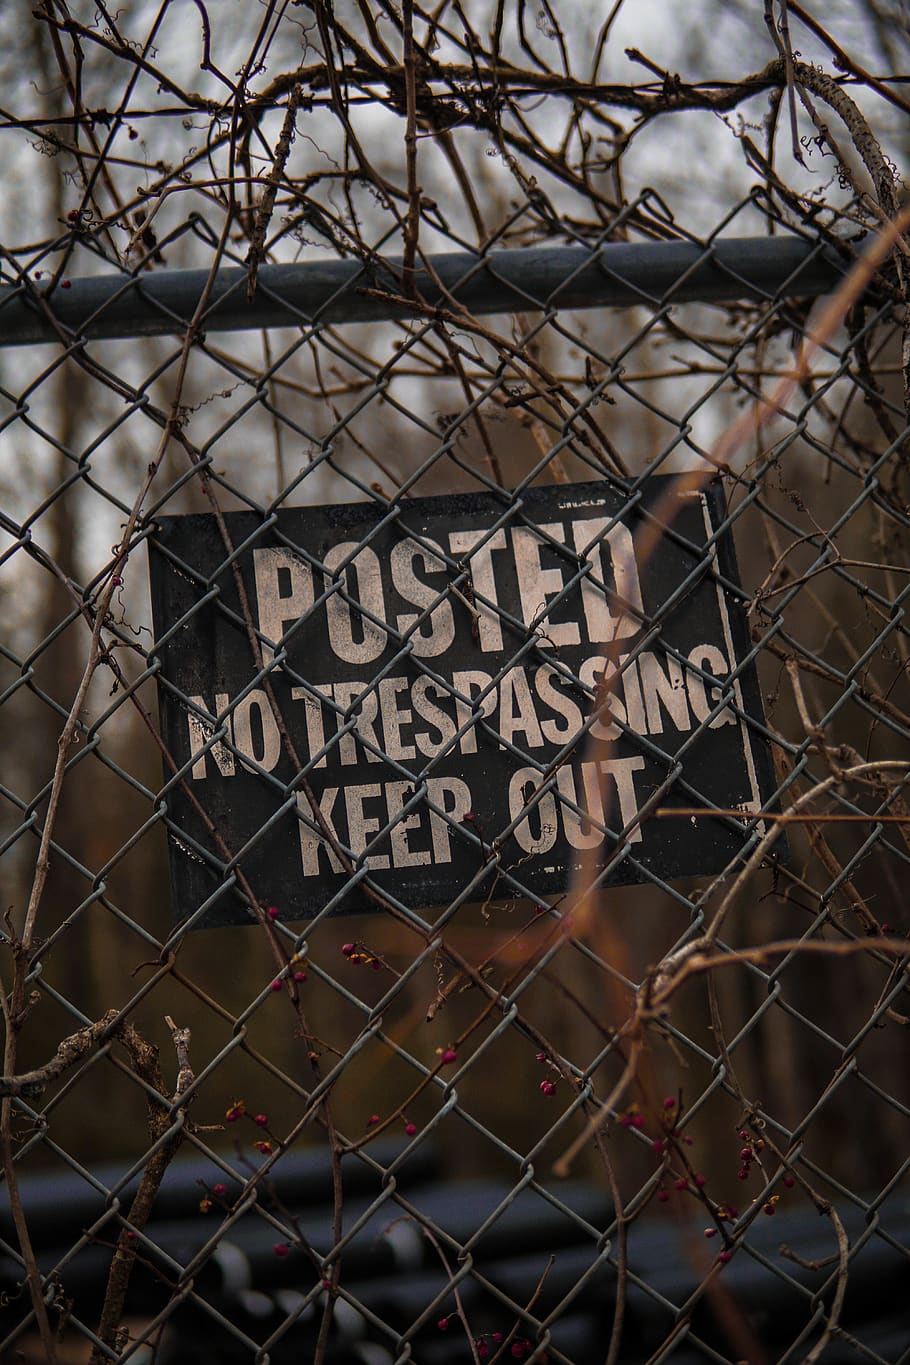 Posted No Trespassing Keep Out signage, text, label, fence, sticker